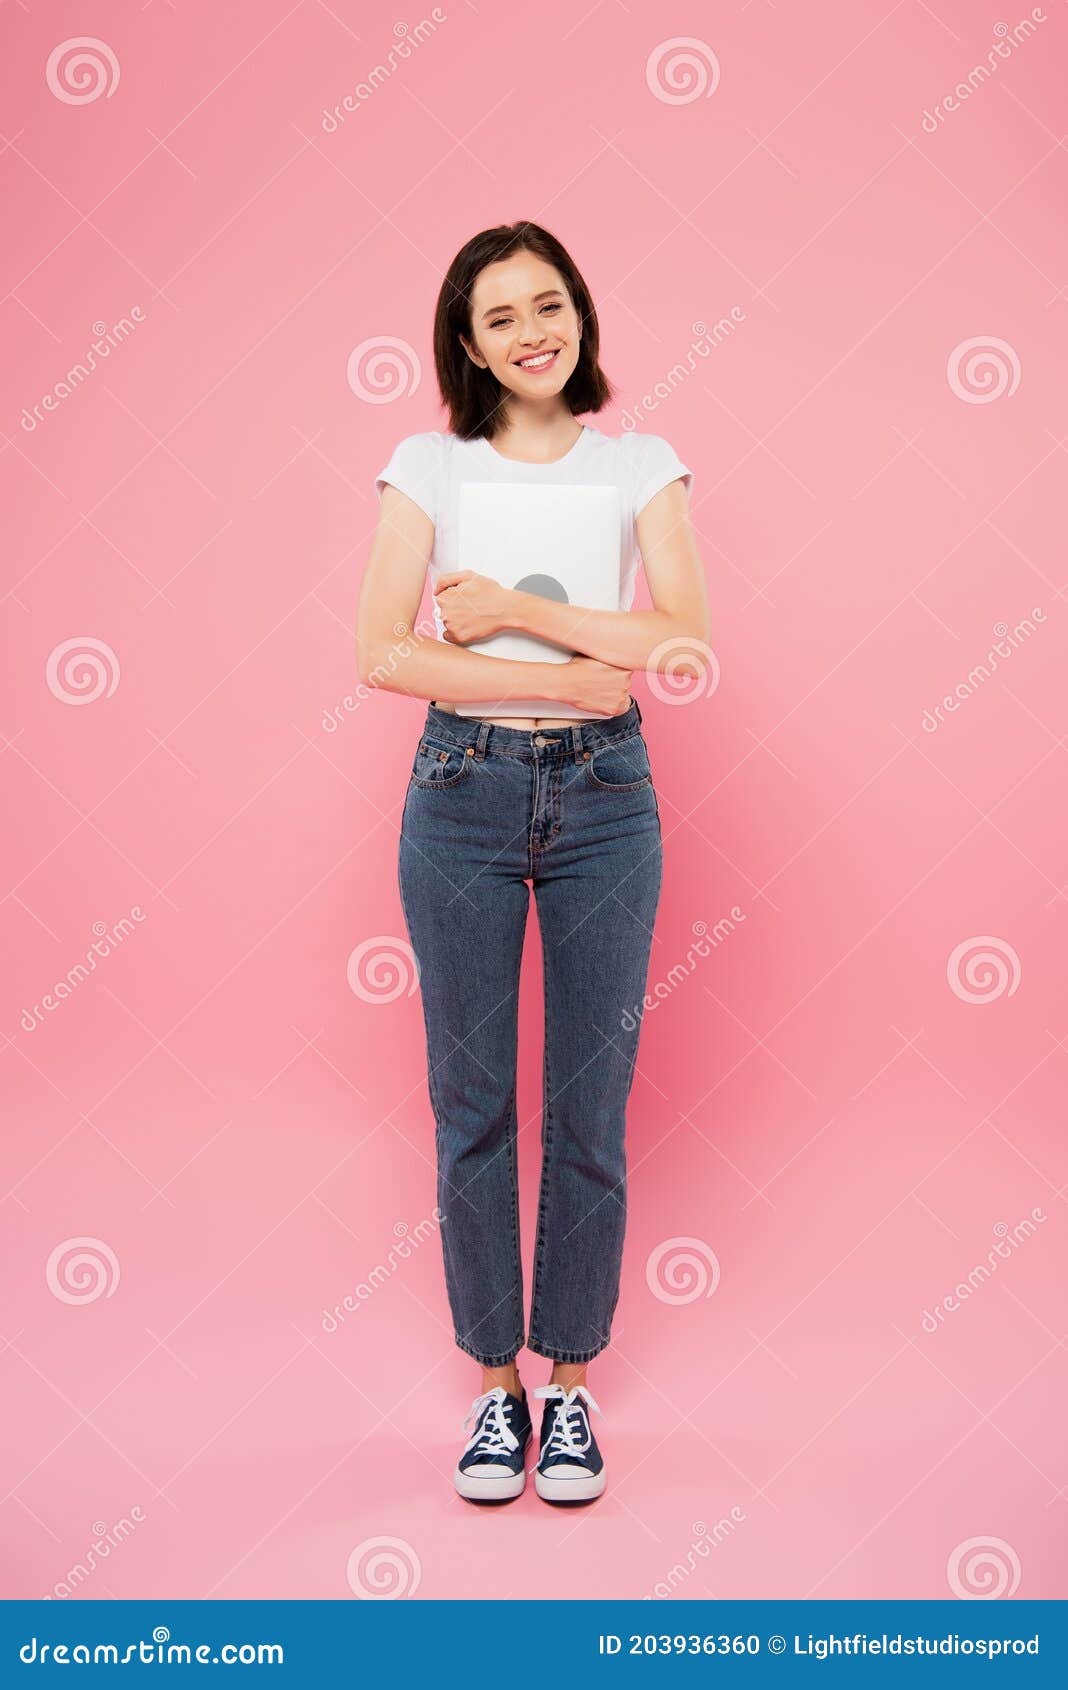 Front View of Smiling Pretty Girl Stock Photo - Image of european ...